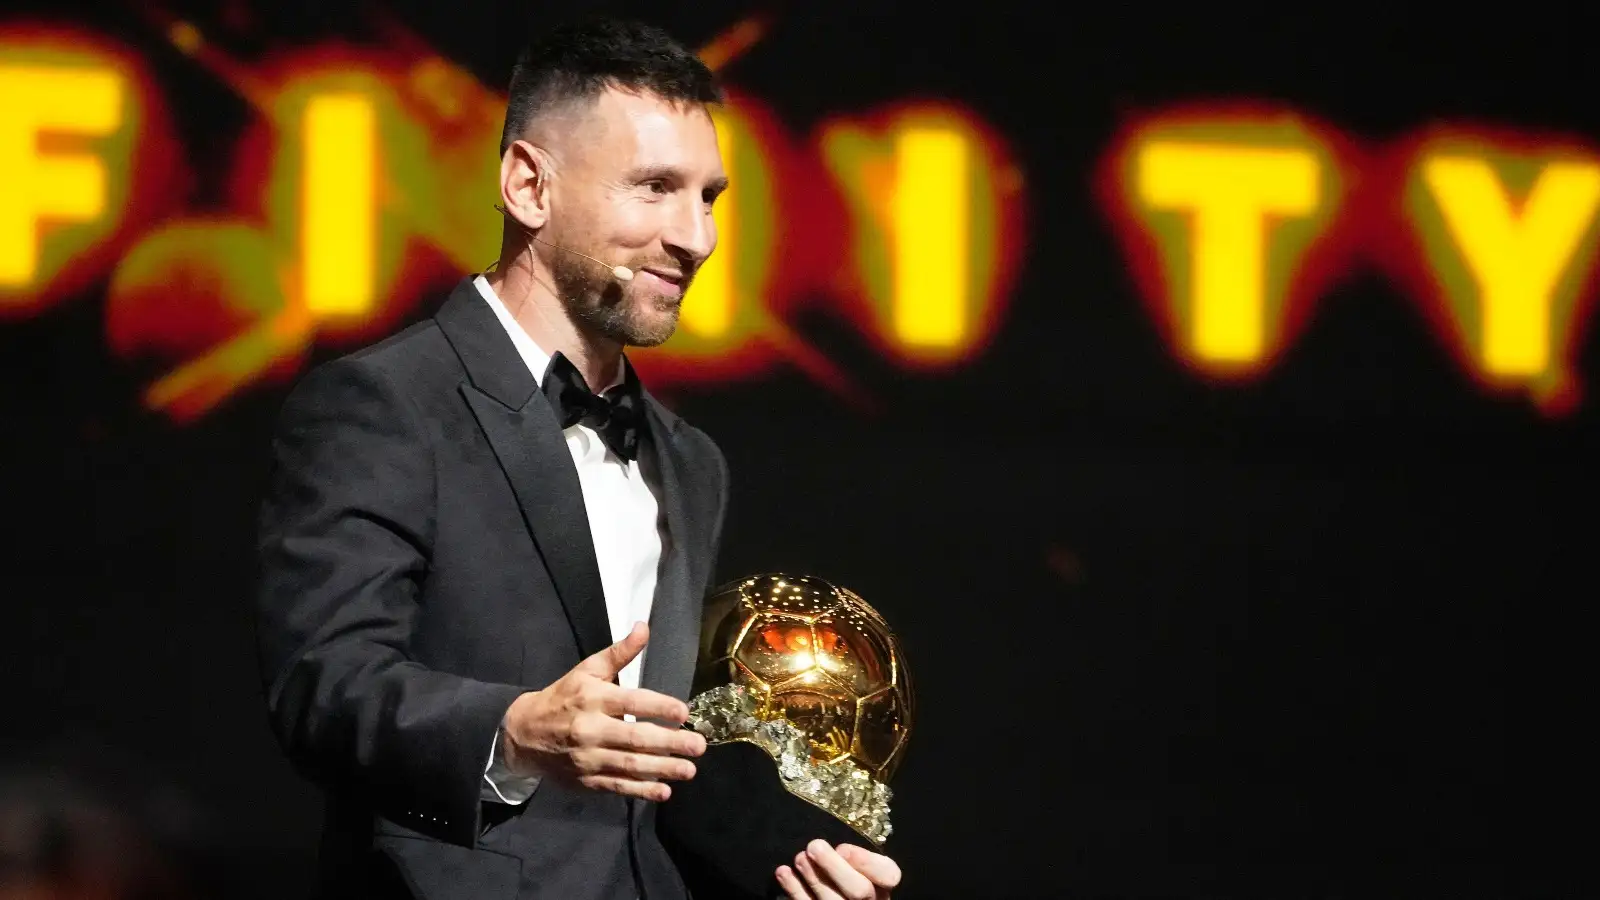 Can you name every player to make the Ballon d’Or podium in Messi’s eight wins?